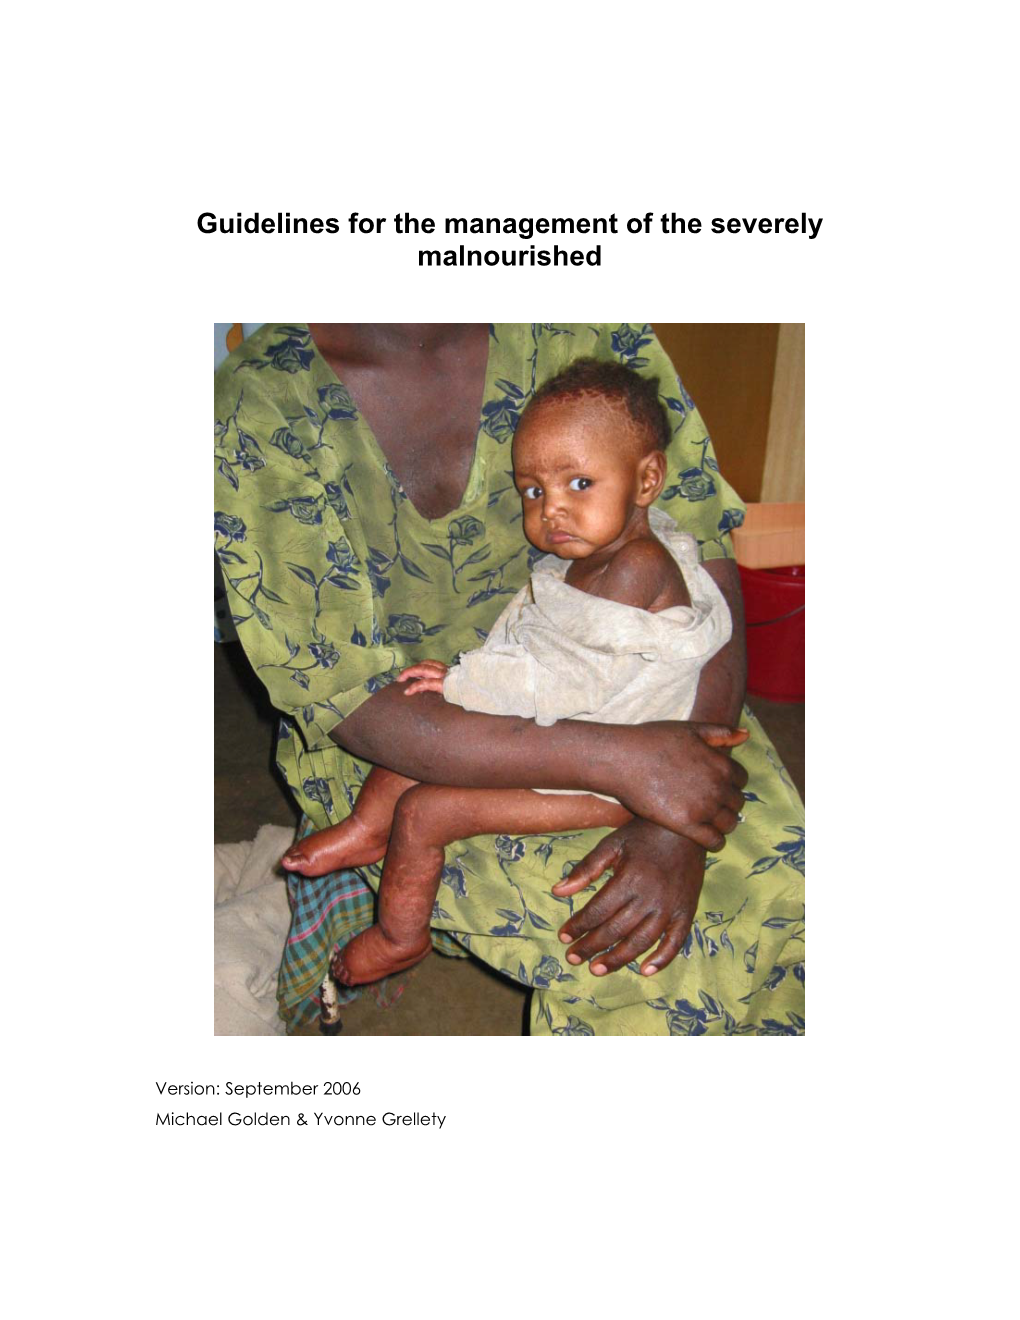 Guidelines for the Management of the Severely Malnourished